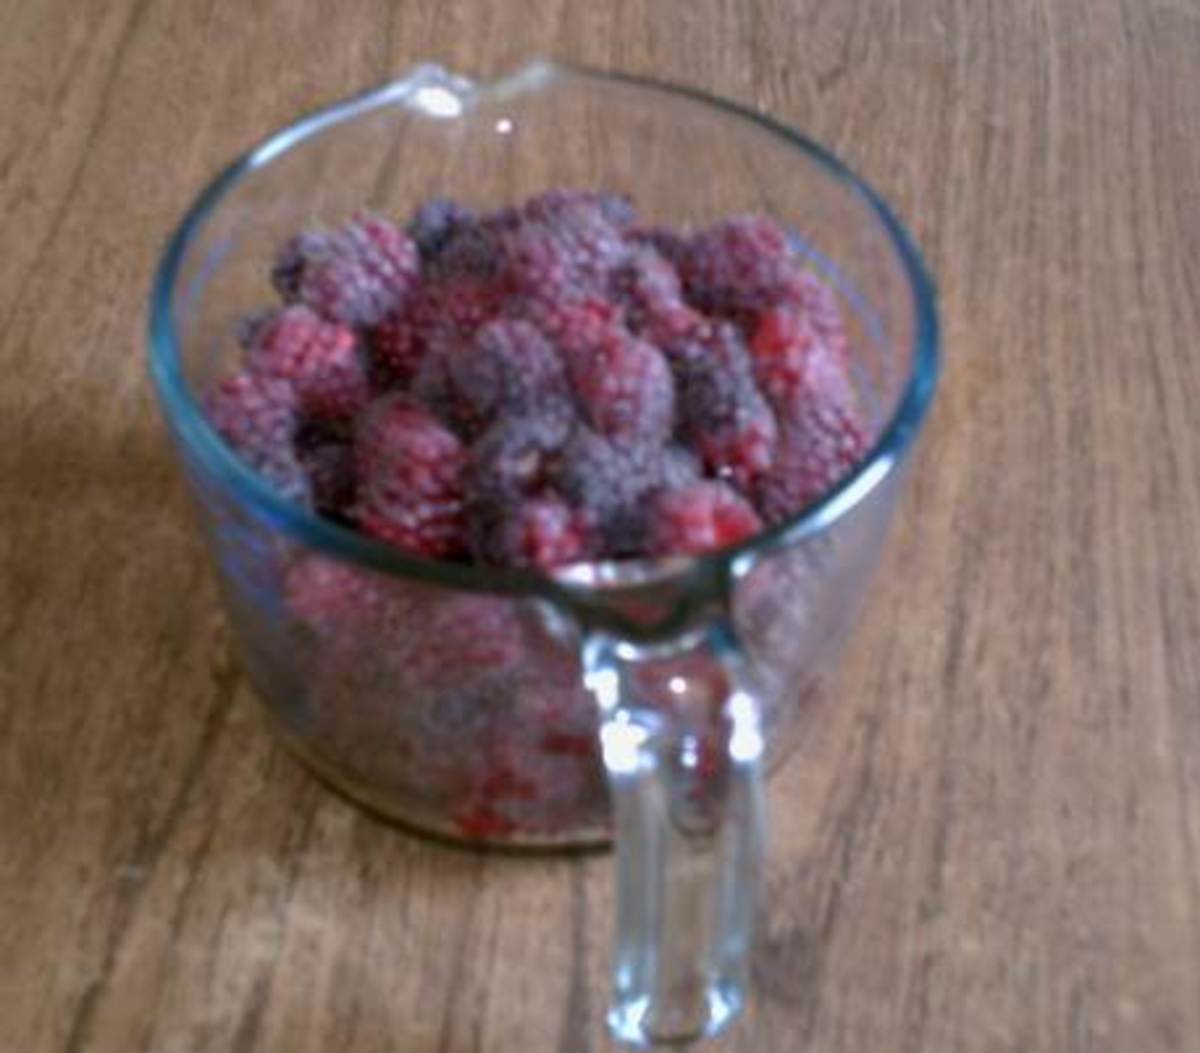 A cup of loganberries.